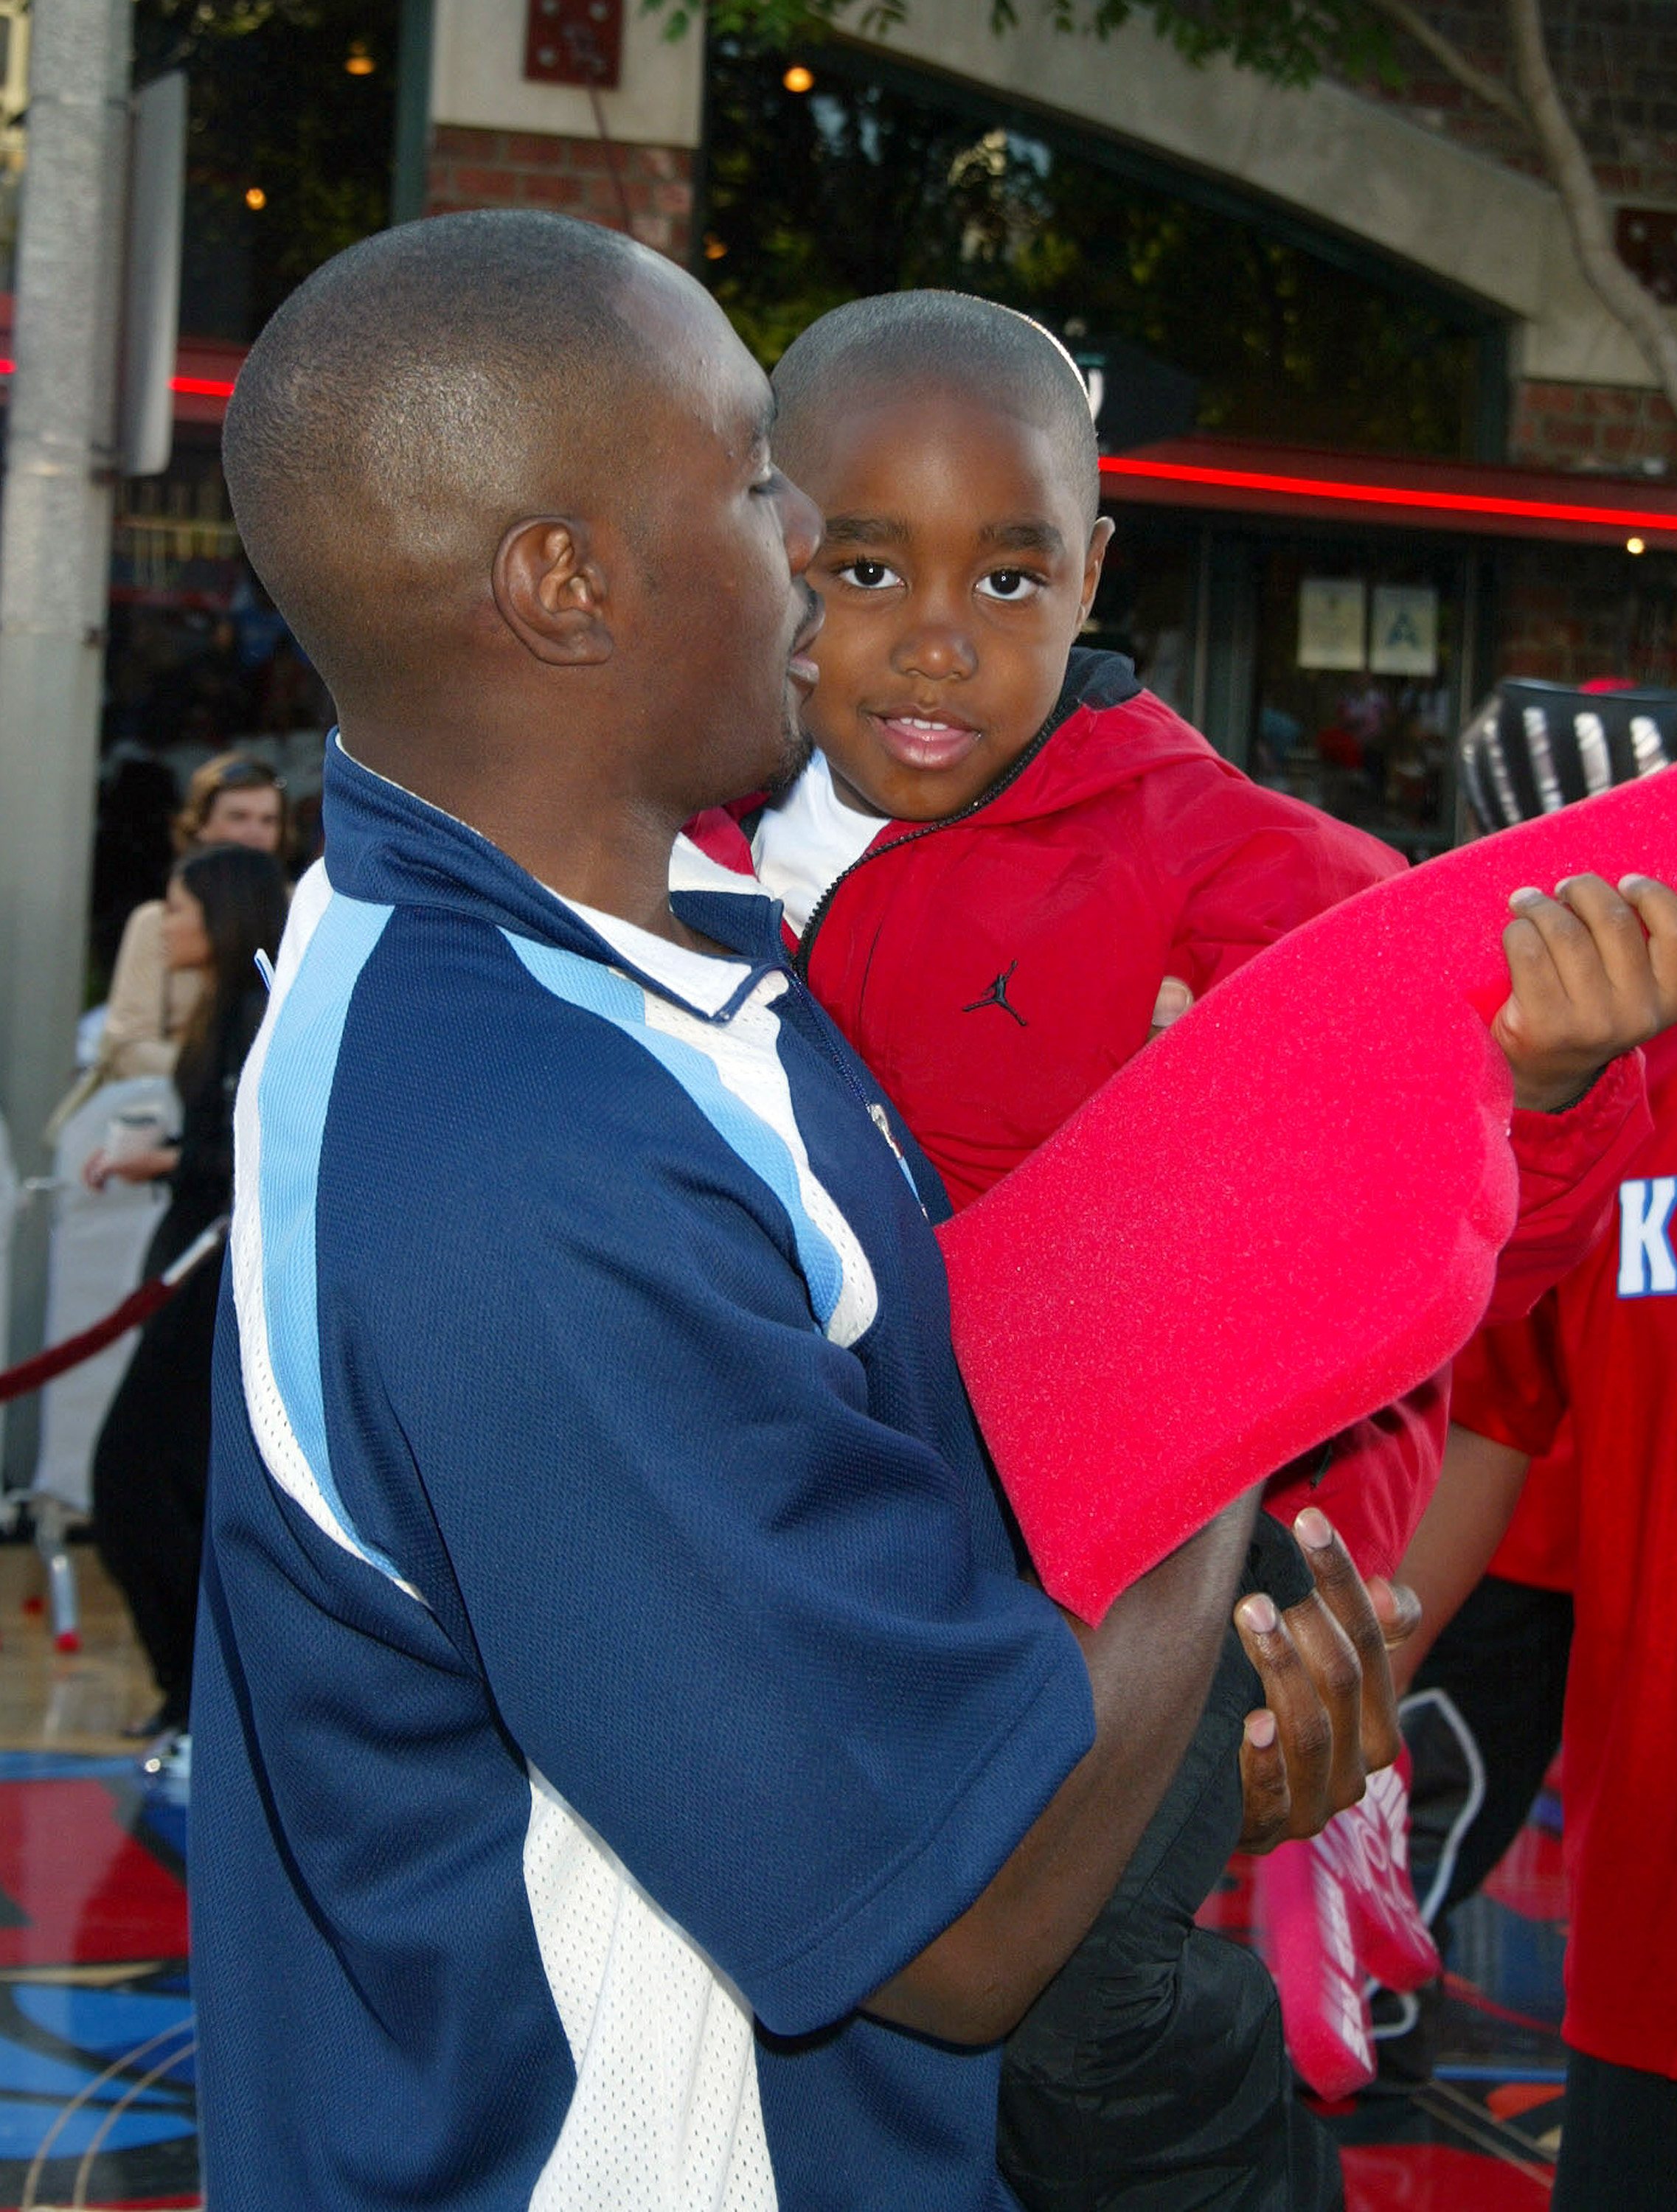 Morris Chestnut and his son, Grant, during the "Like Mike" premiere in Westwood, California, on June 27, 2002 | Source: Getty Images